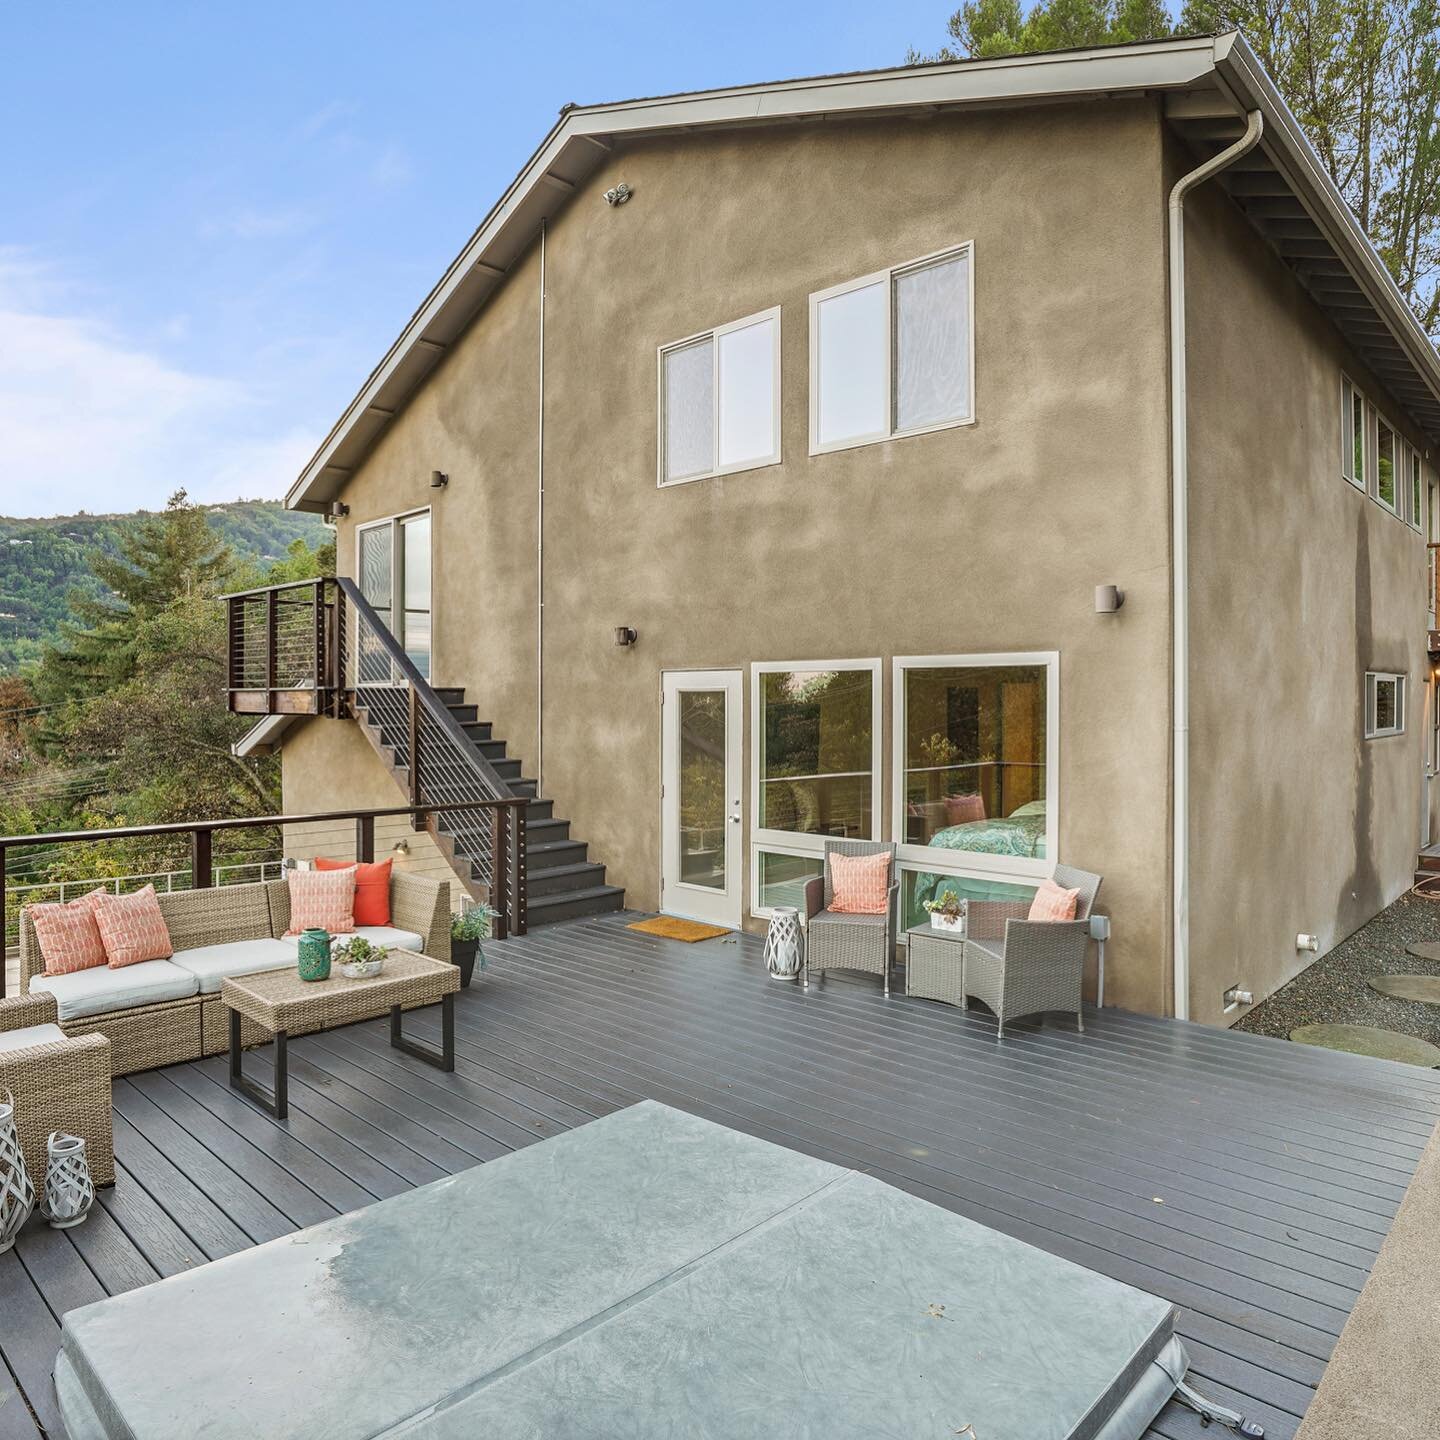 Open House:
4 🛏 | 4 🛁 | 3 🏎 
2800 sq/ft | 0.54 lot
21043 Canyon View, #Saratoga
-
Stunning. Absolutely Stunning. Come Check Out This Newest Listing Tomorrow. Remodeled From Ground Up 8 Years Ago. Modern Green Home With Amazing Views. Seriously One